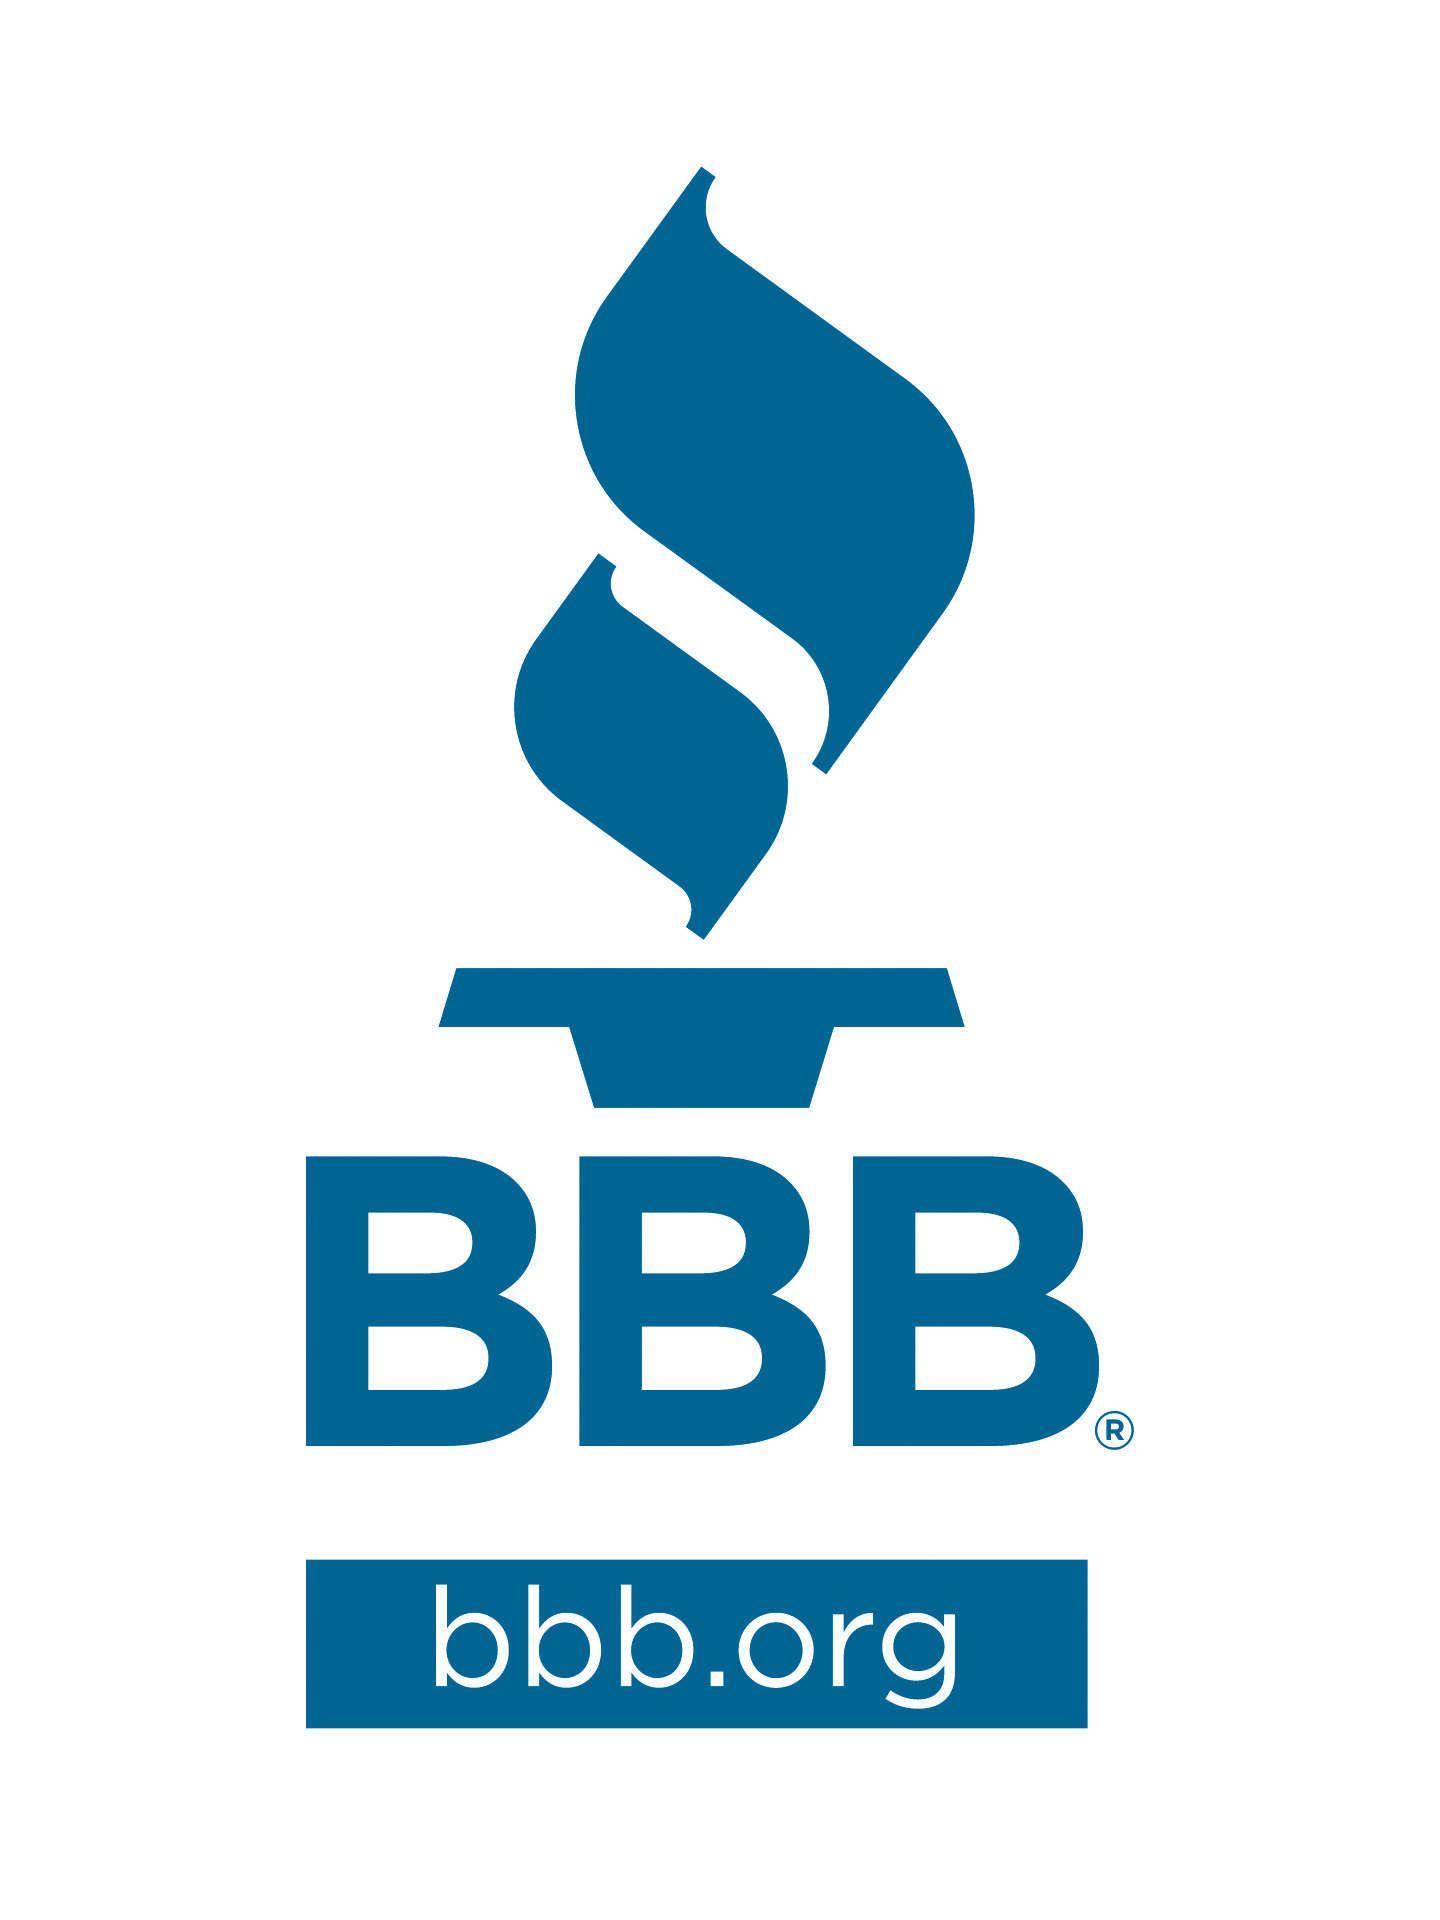 Bbb.org Logo - BBB Serving Northern Indiana: Start With Trust